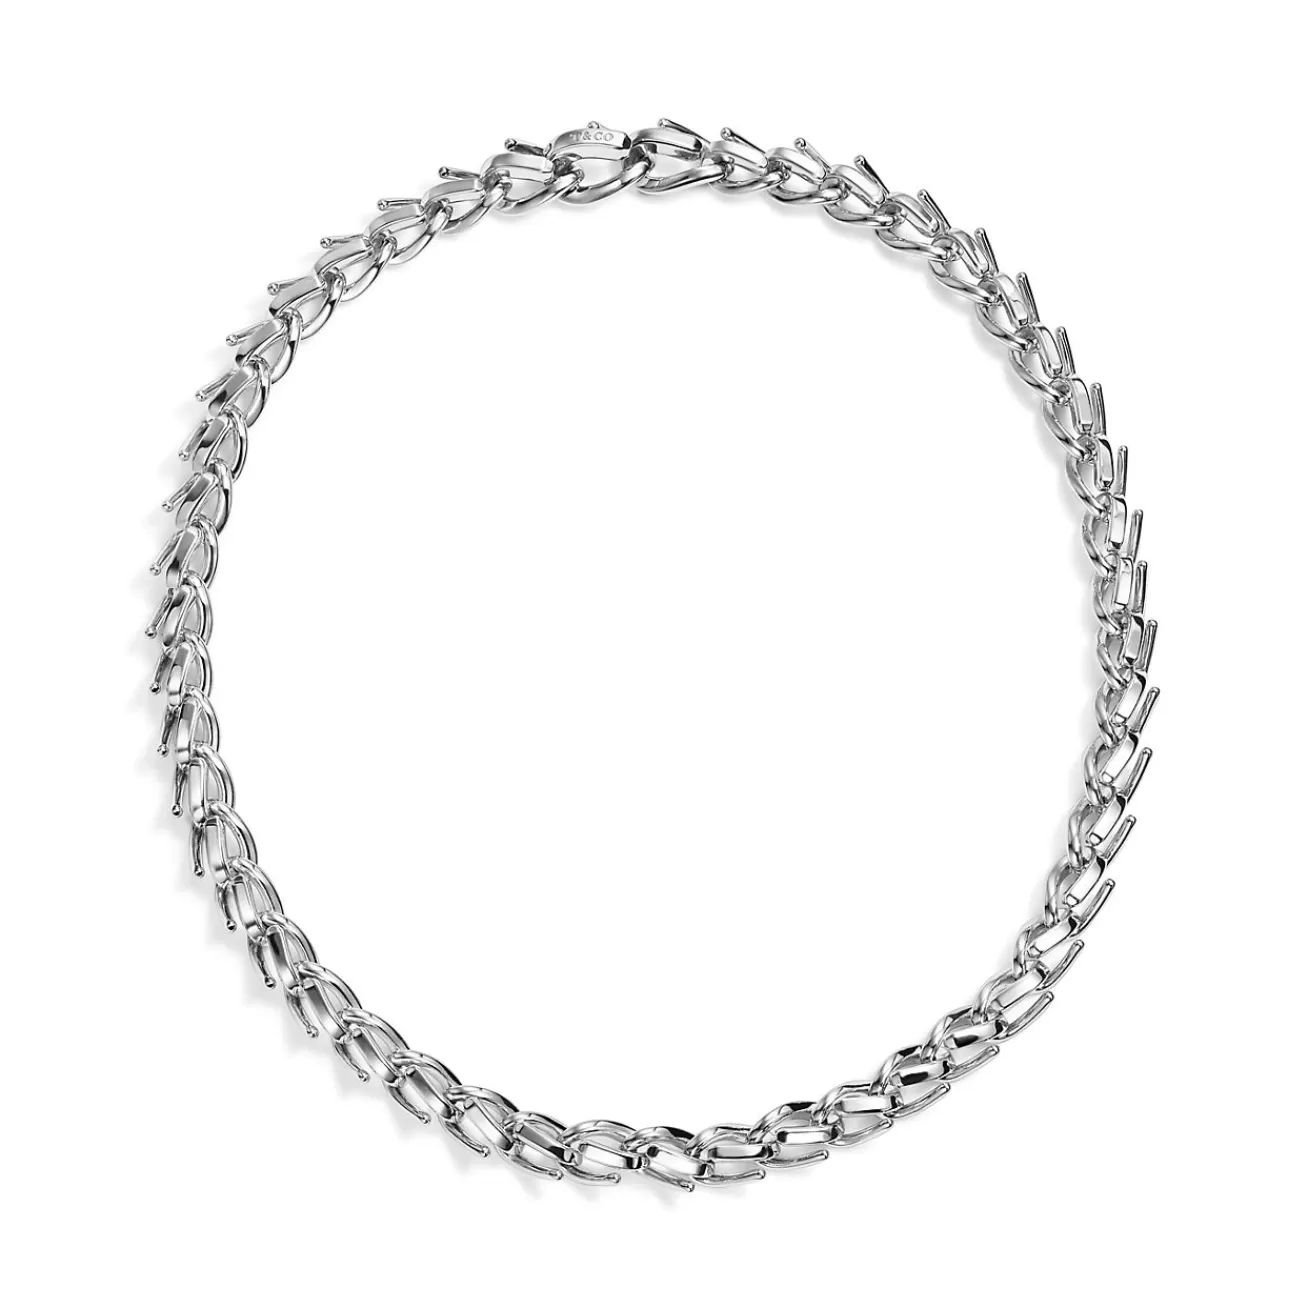 Tiffany & Co. Tiffany Forge Medium Link Necklace in High- polished Sterling Silver | ^ Necklaces & Pendants | Men's Jewelry